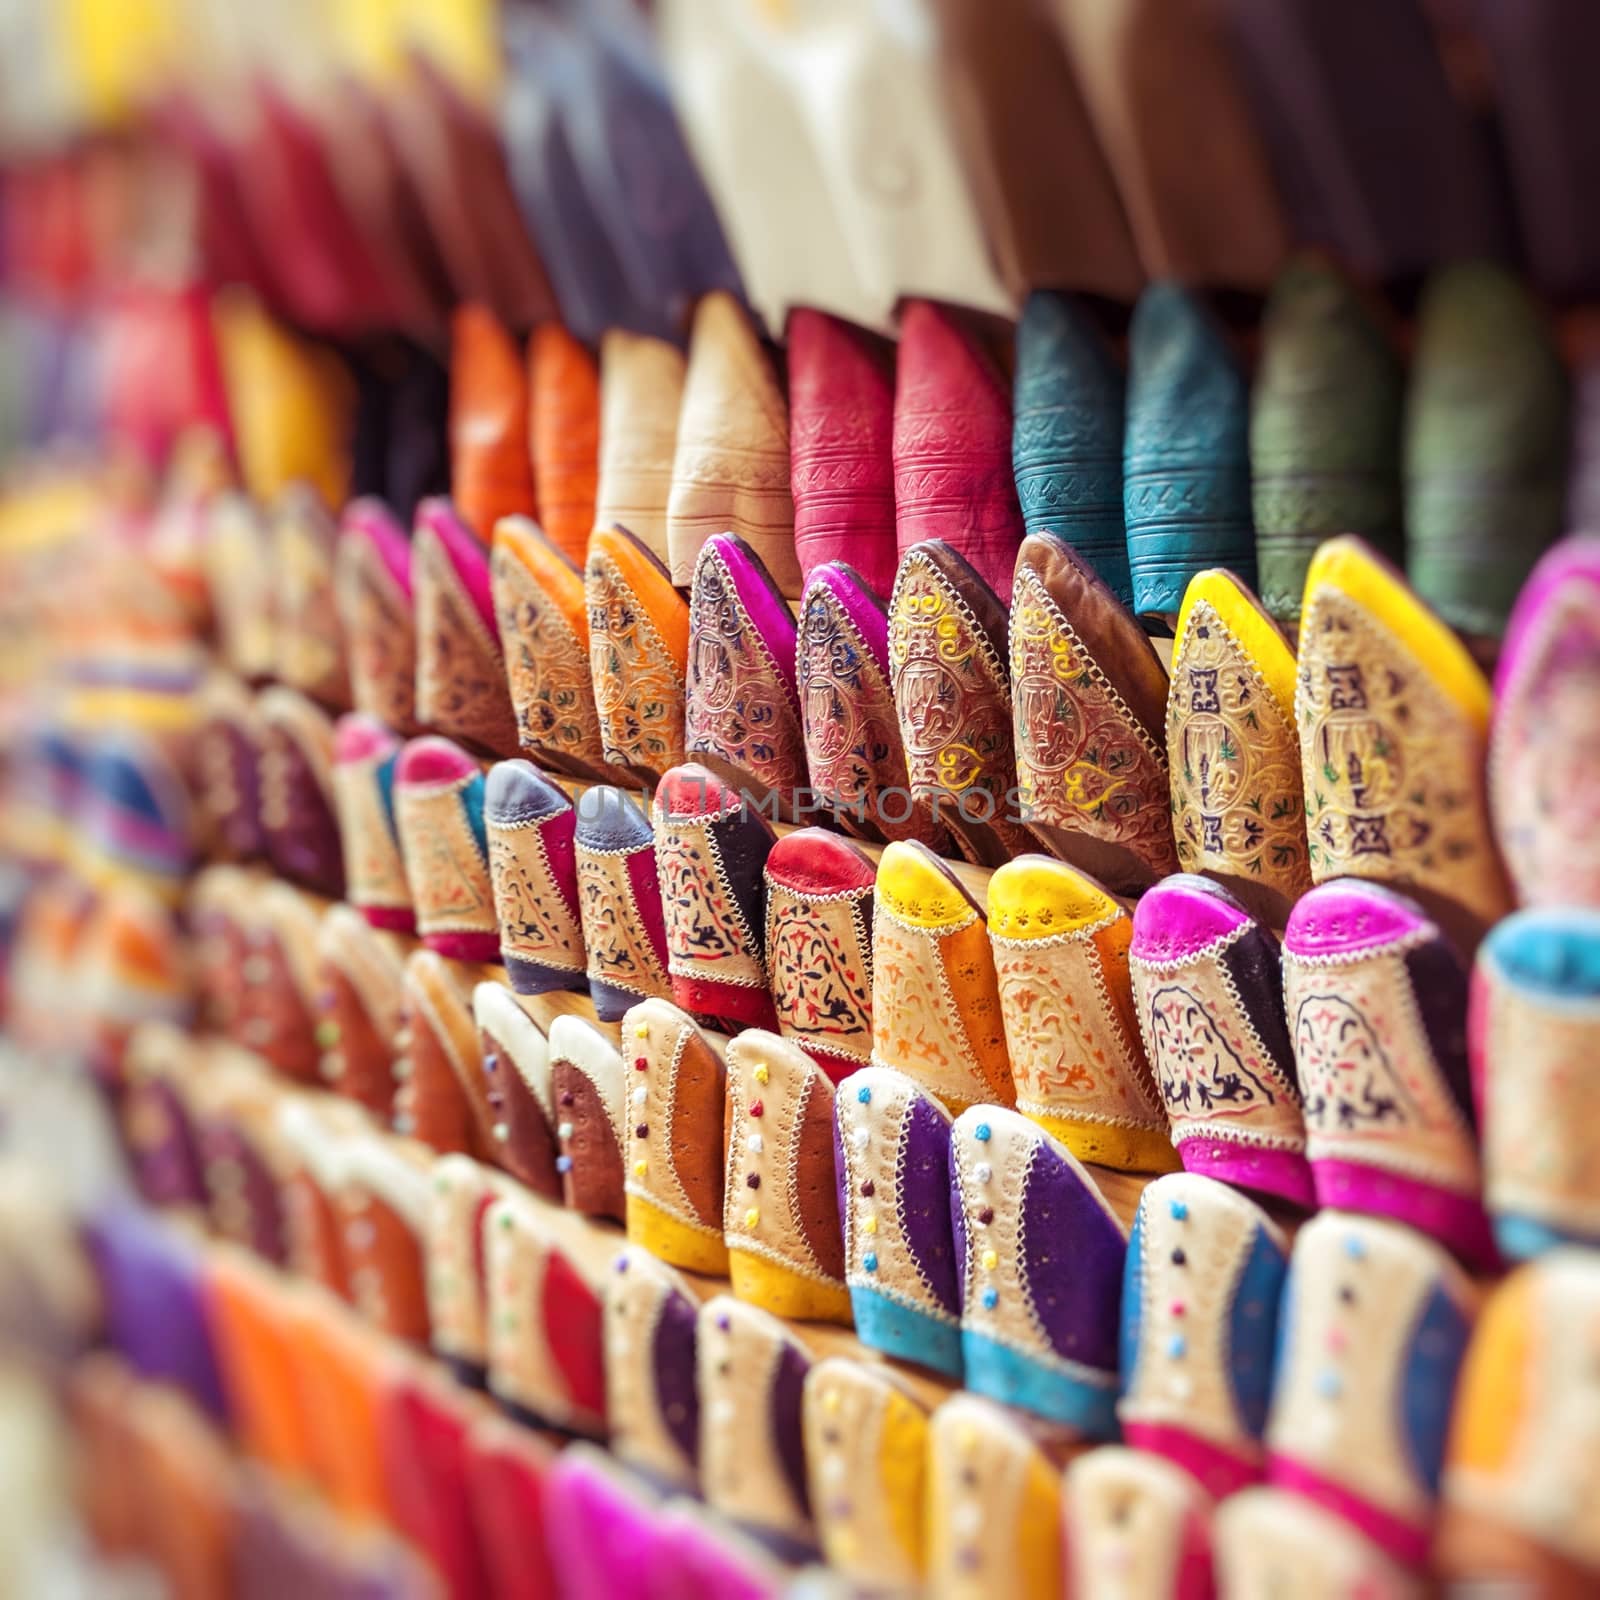 Colourful Moroccan slippers, Marrakesh by mariusz_prusaczyk